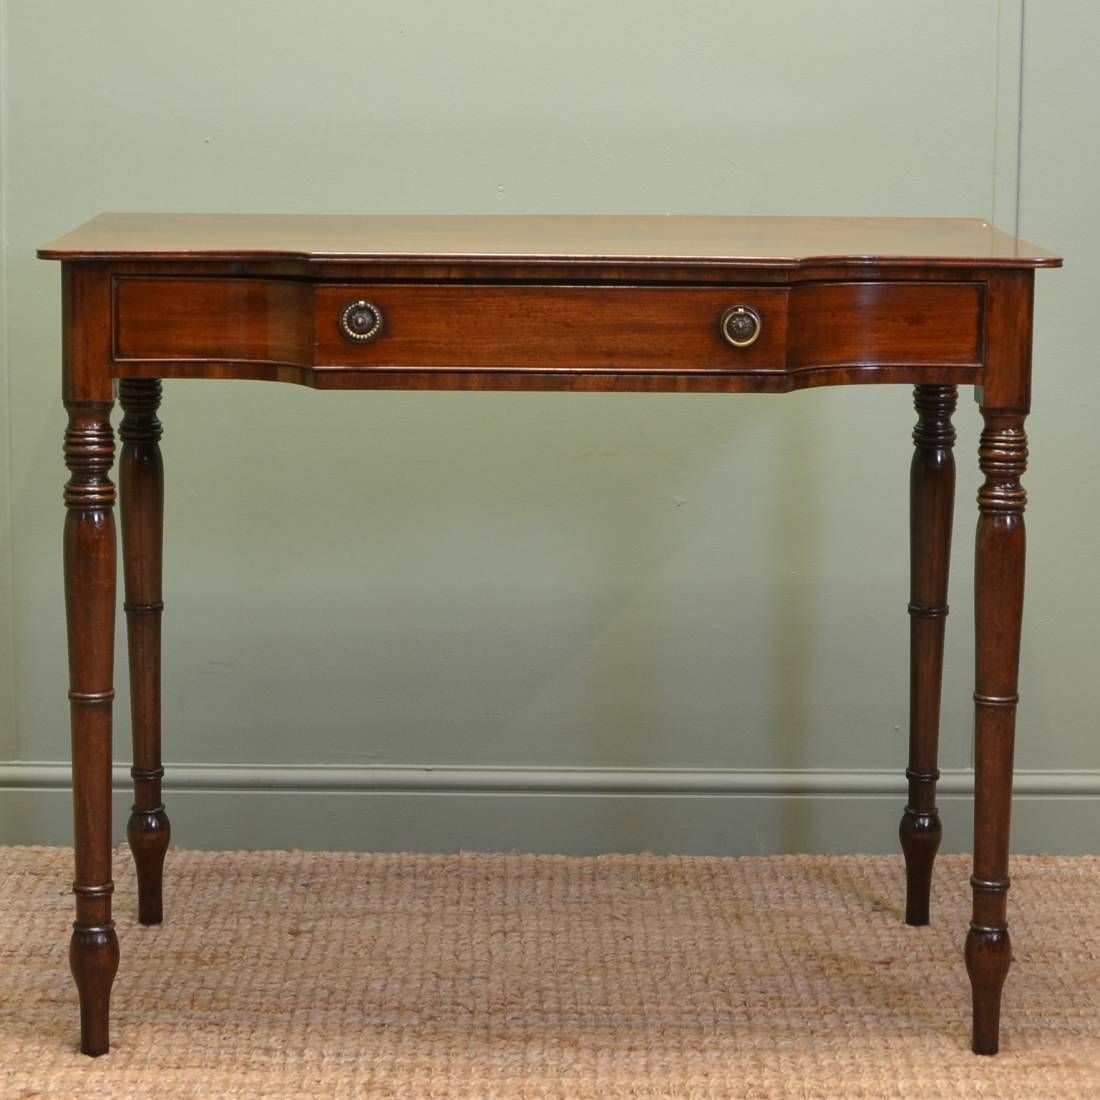 Sensational Regency Mahogany Antique Console / Side Table – Antiques World For Antique Brass Round Console Tables (View 8 of 20)